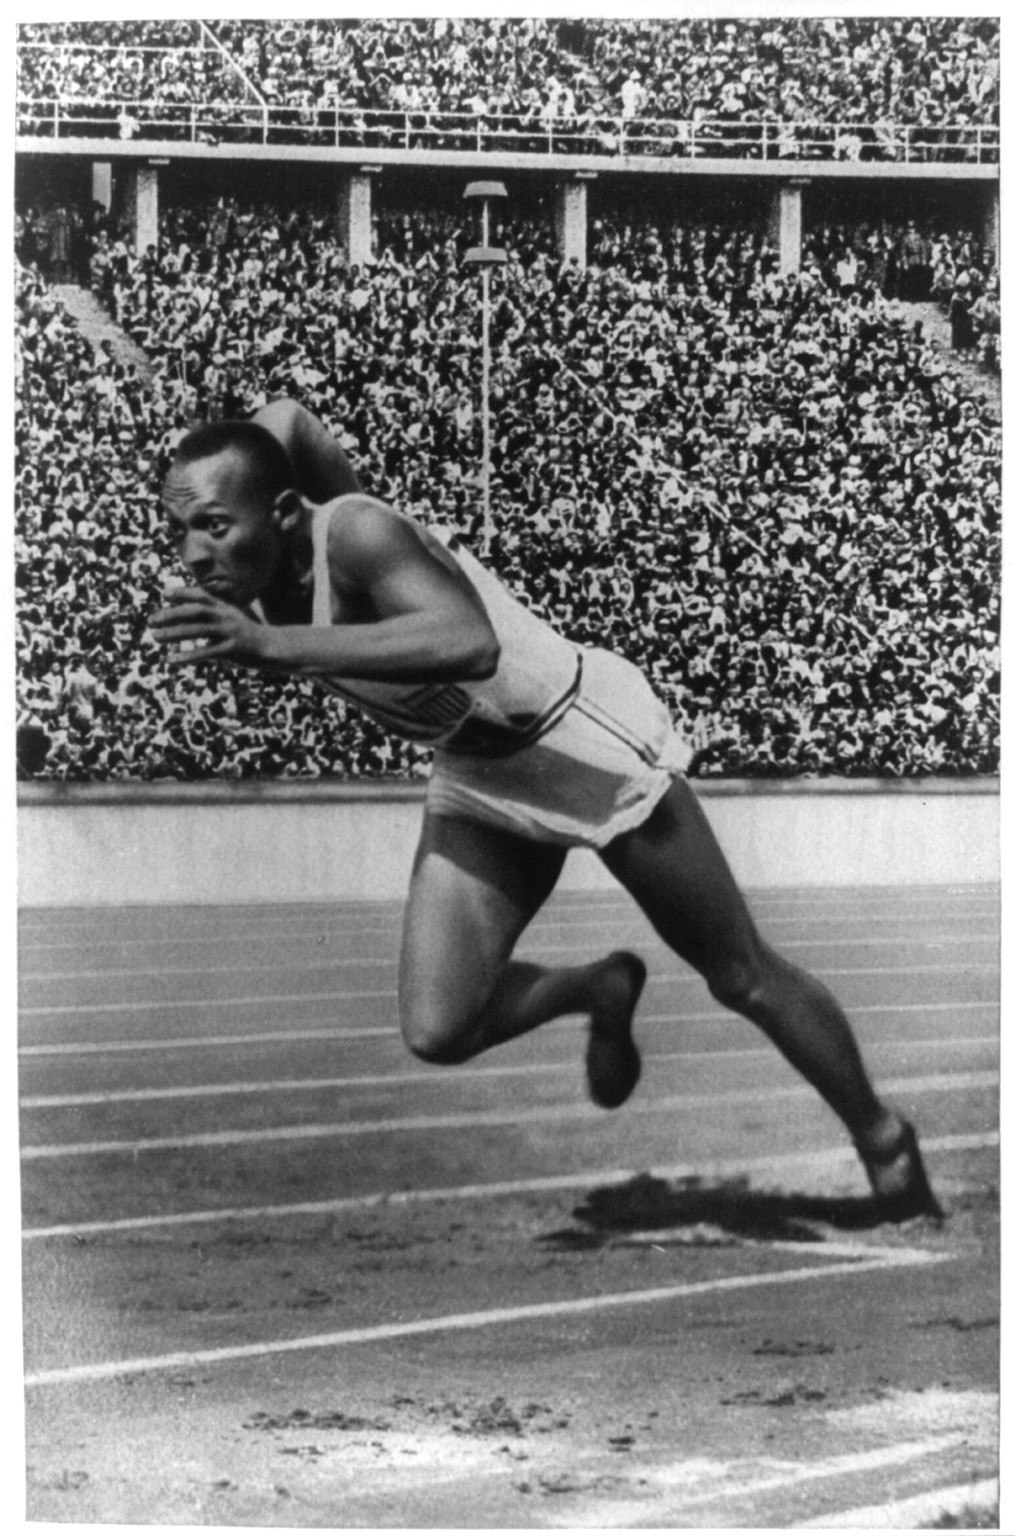 Jesse Owens running on the track